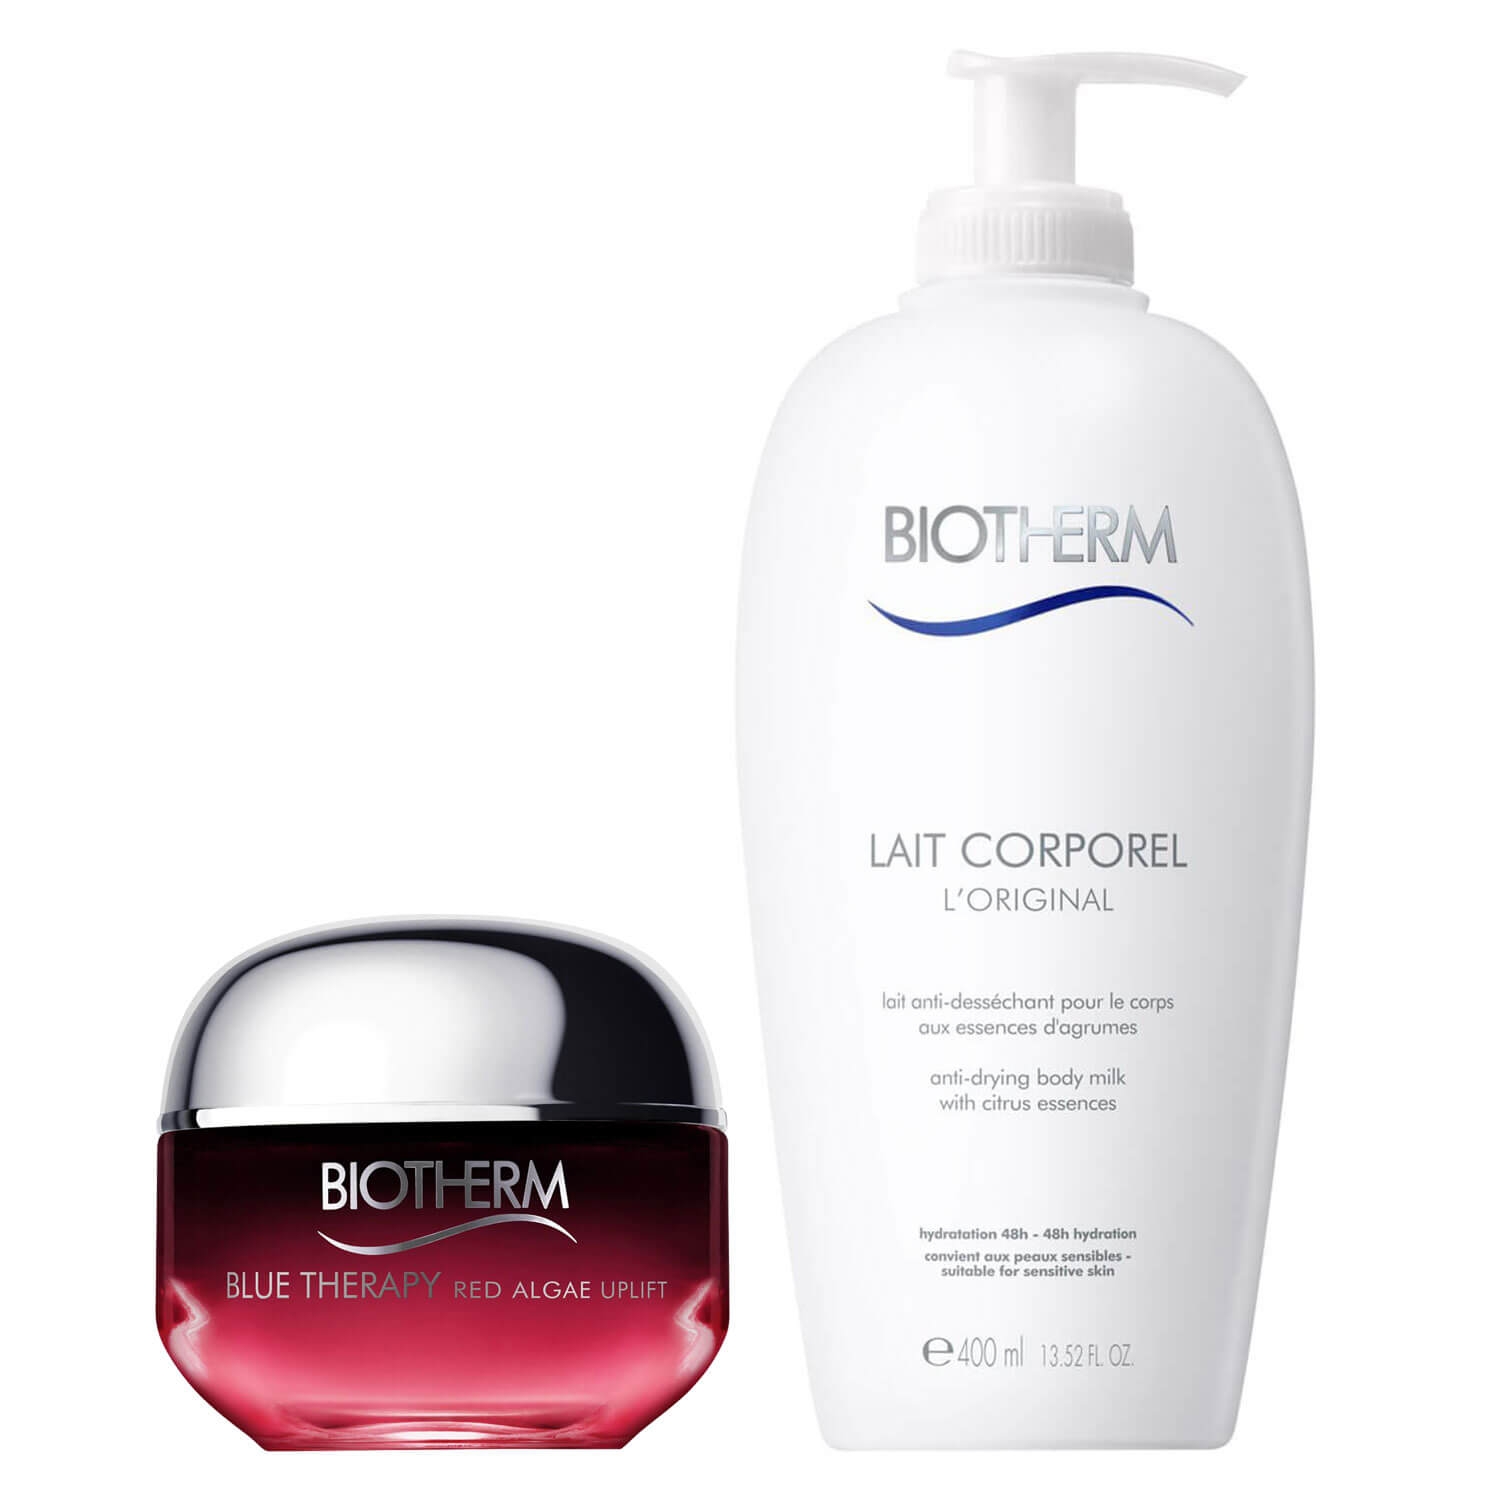 Product image from Biotherm Specials - Blue Therapy Red Algae Uplift & Lait Corporel